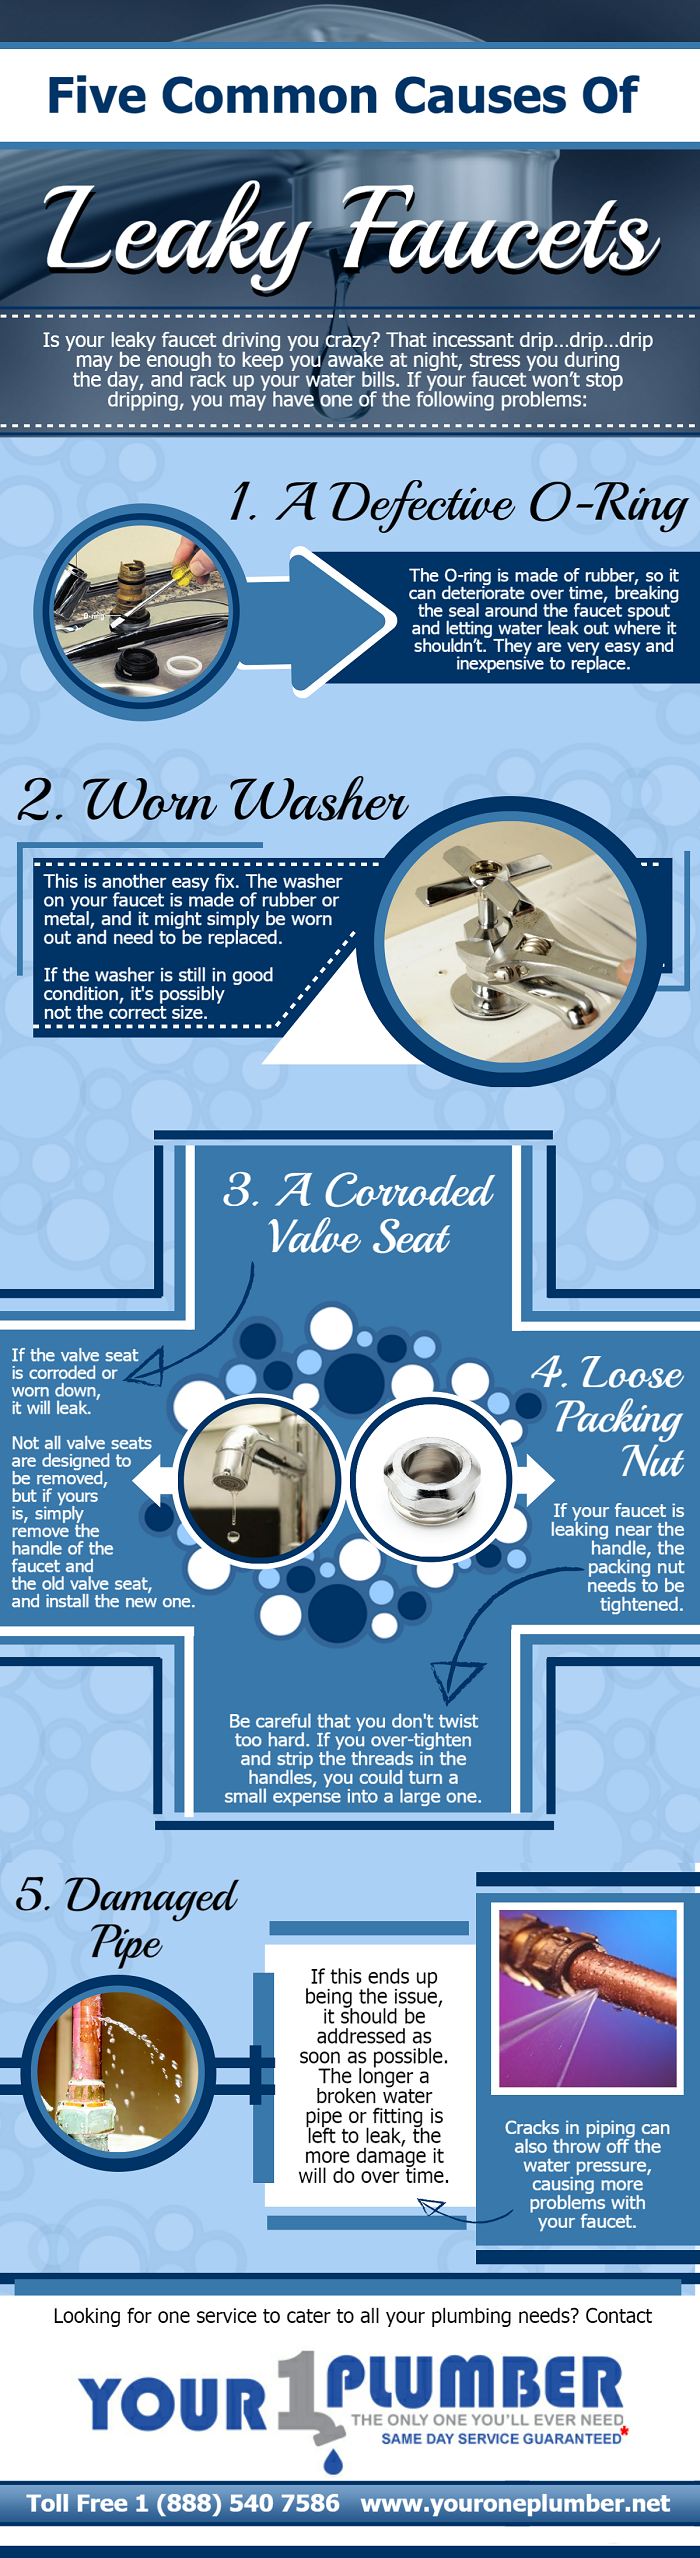 Five Common Causes of Leaky Faucets